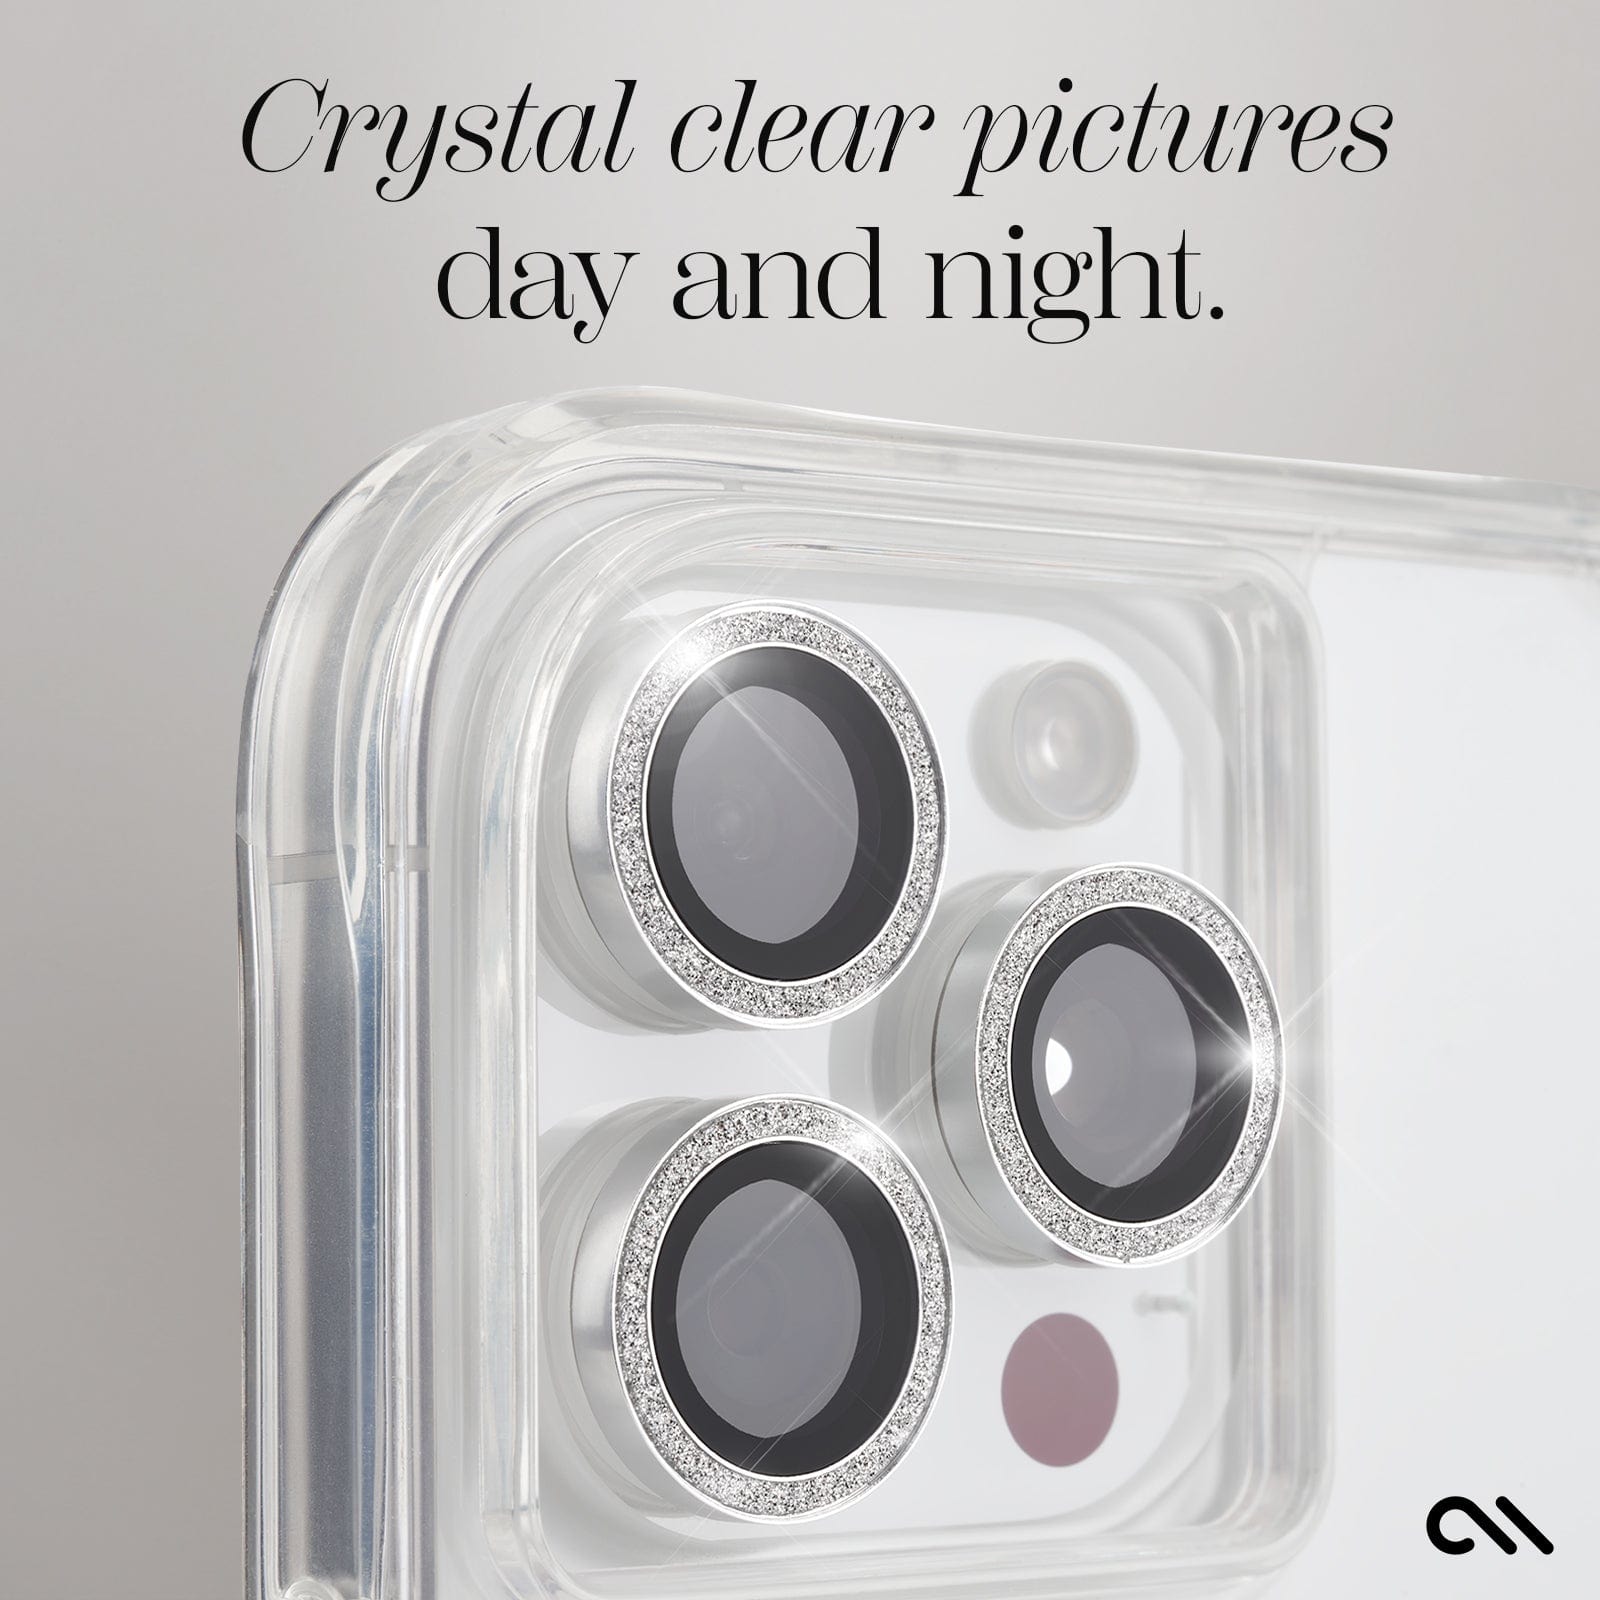 CRYSTAL CLEAR PICTURES DAY AND NIGHT